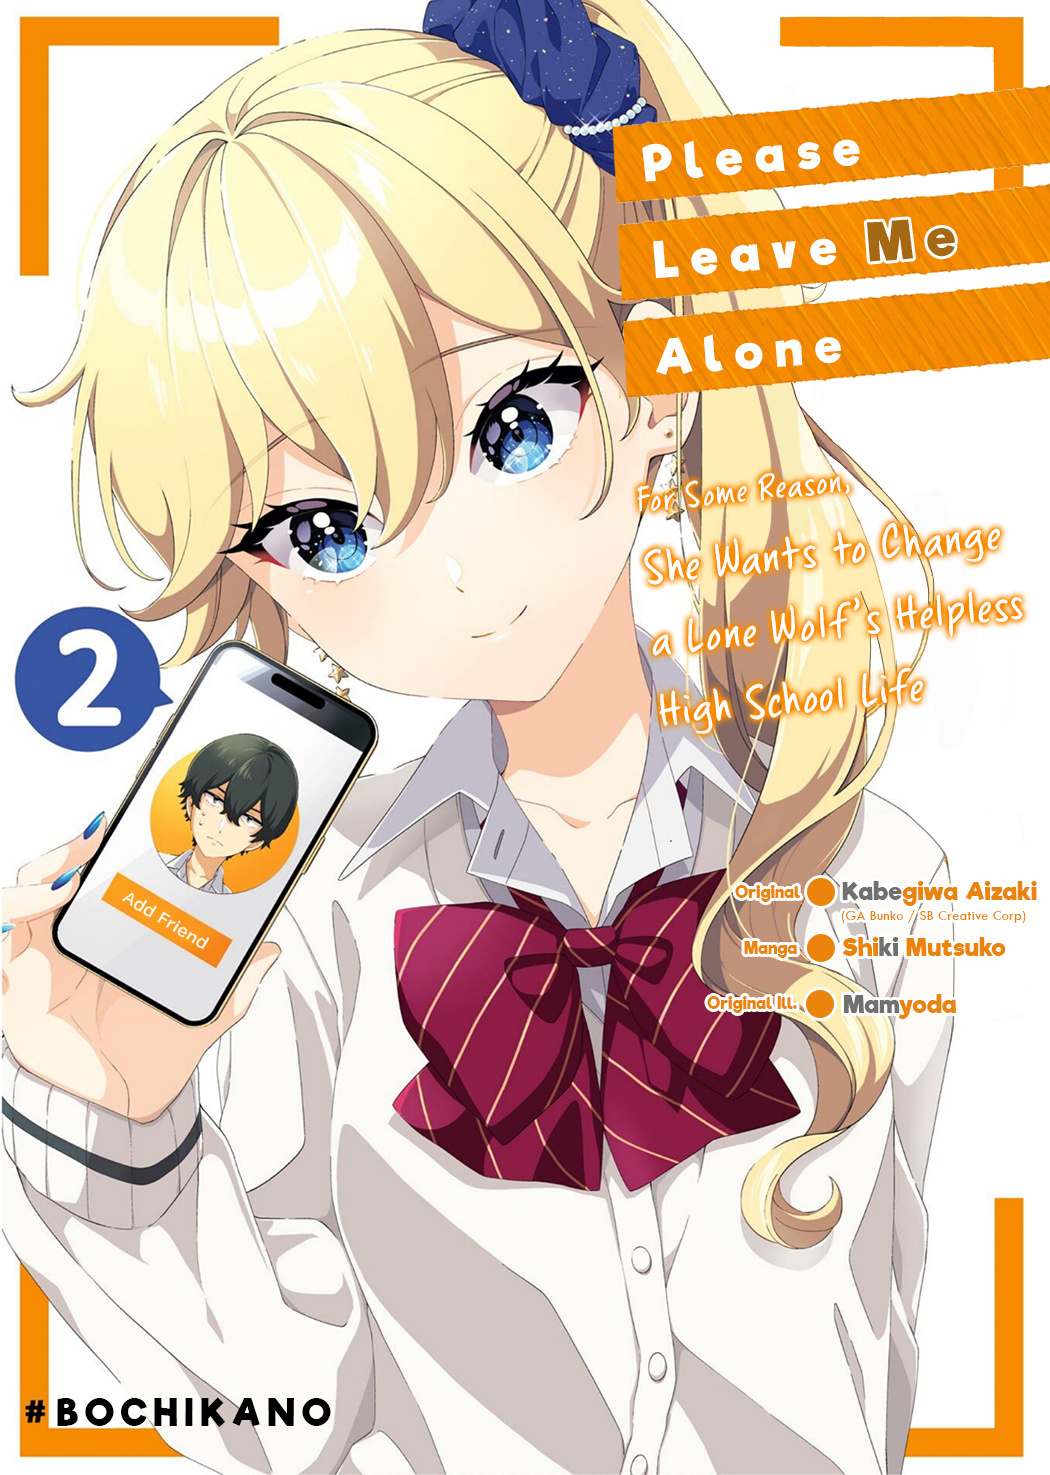 Please Leave Me Alone (For Some Reason, She Wants to Change a Lone Wolf's Helpless High School Life.) Vol.2 Chapter 11.5